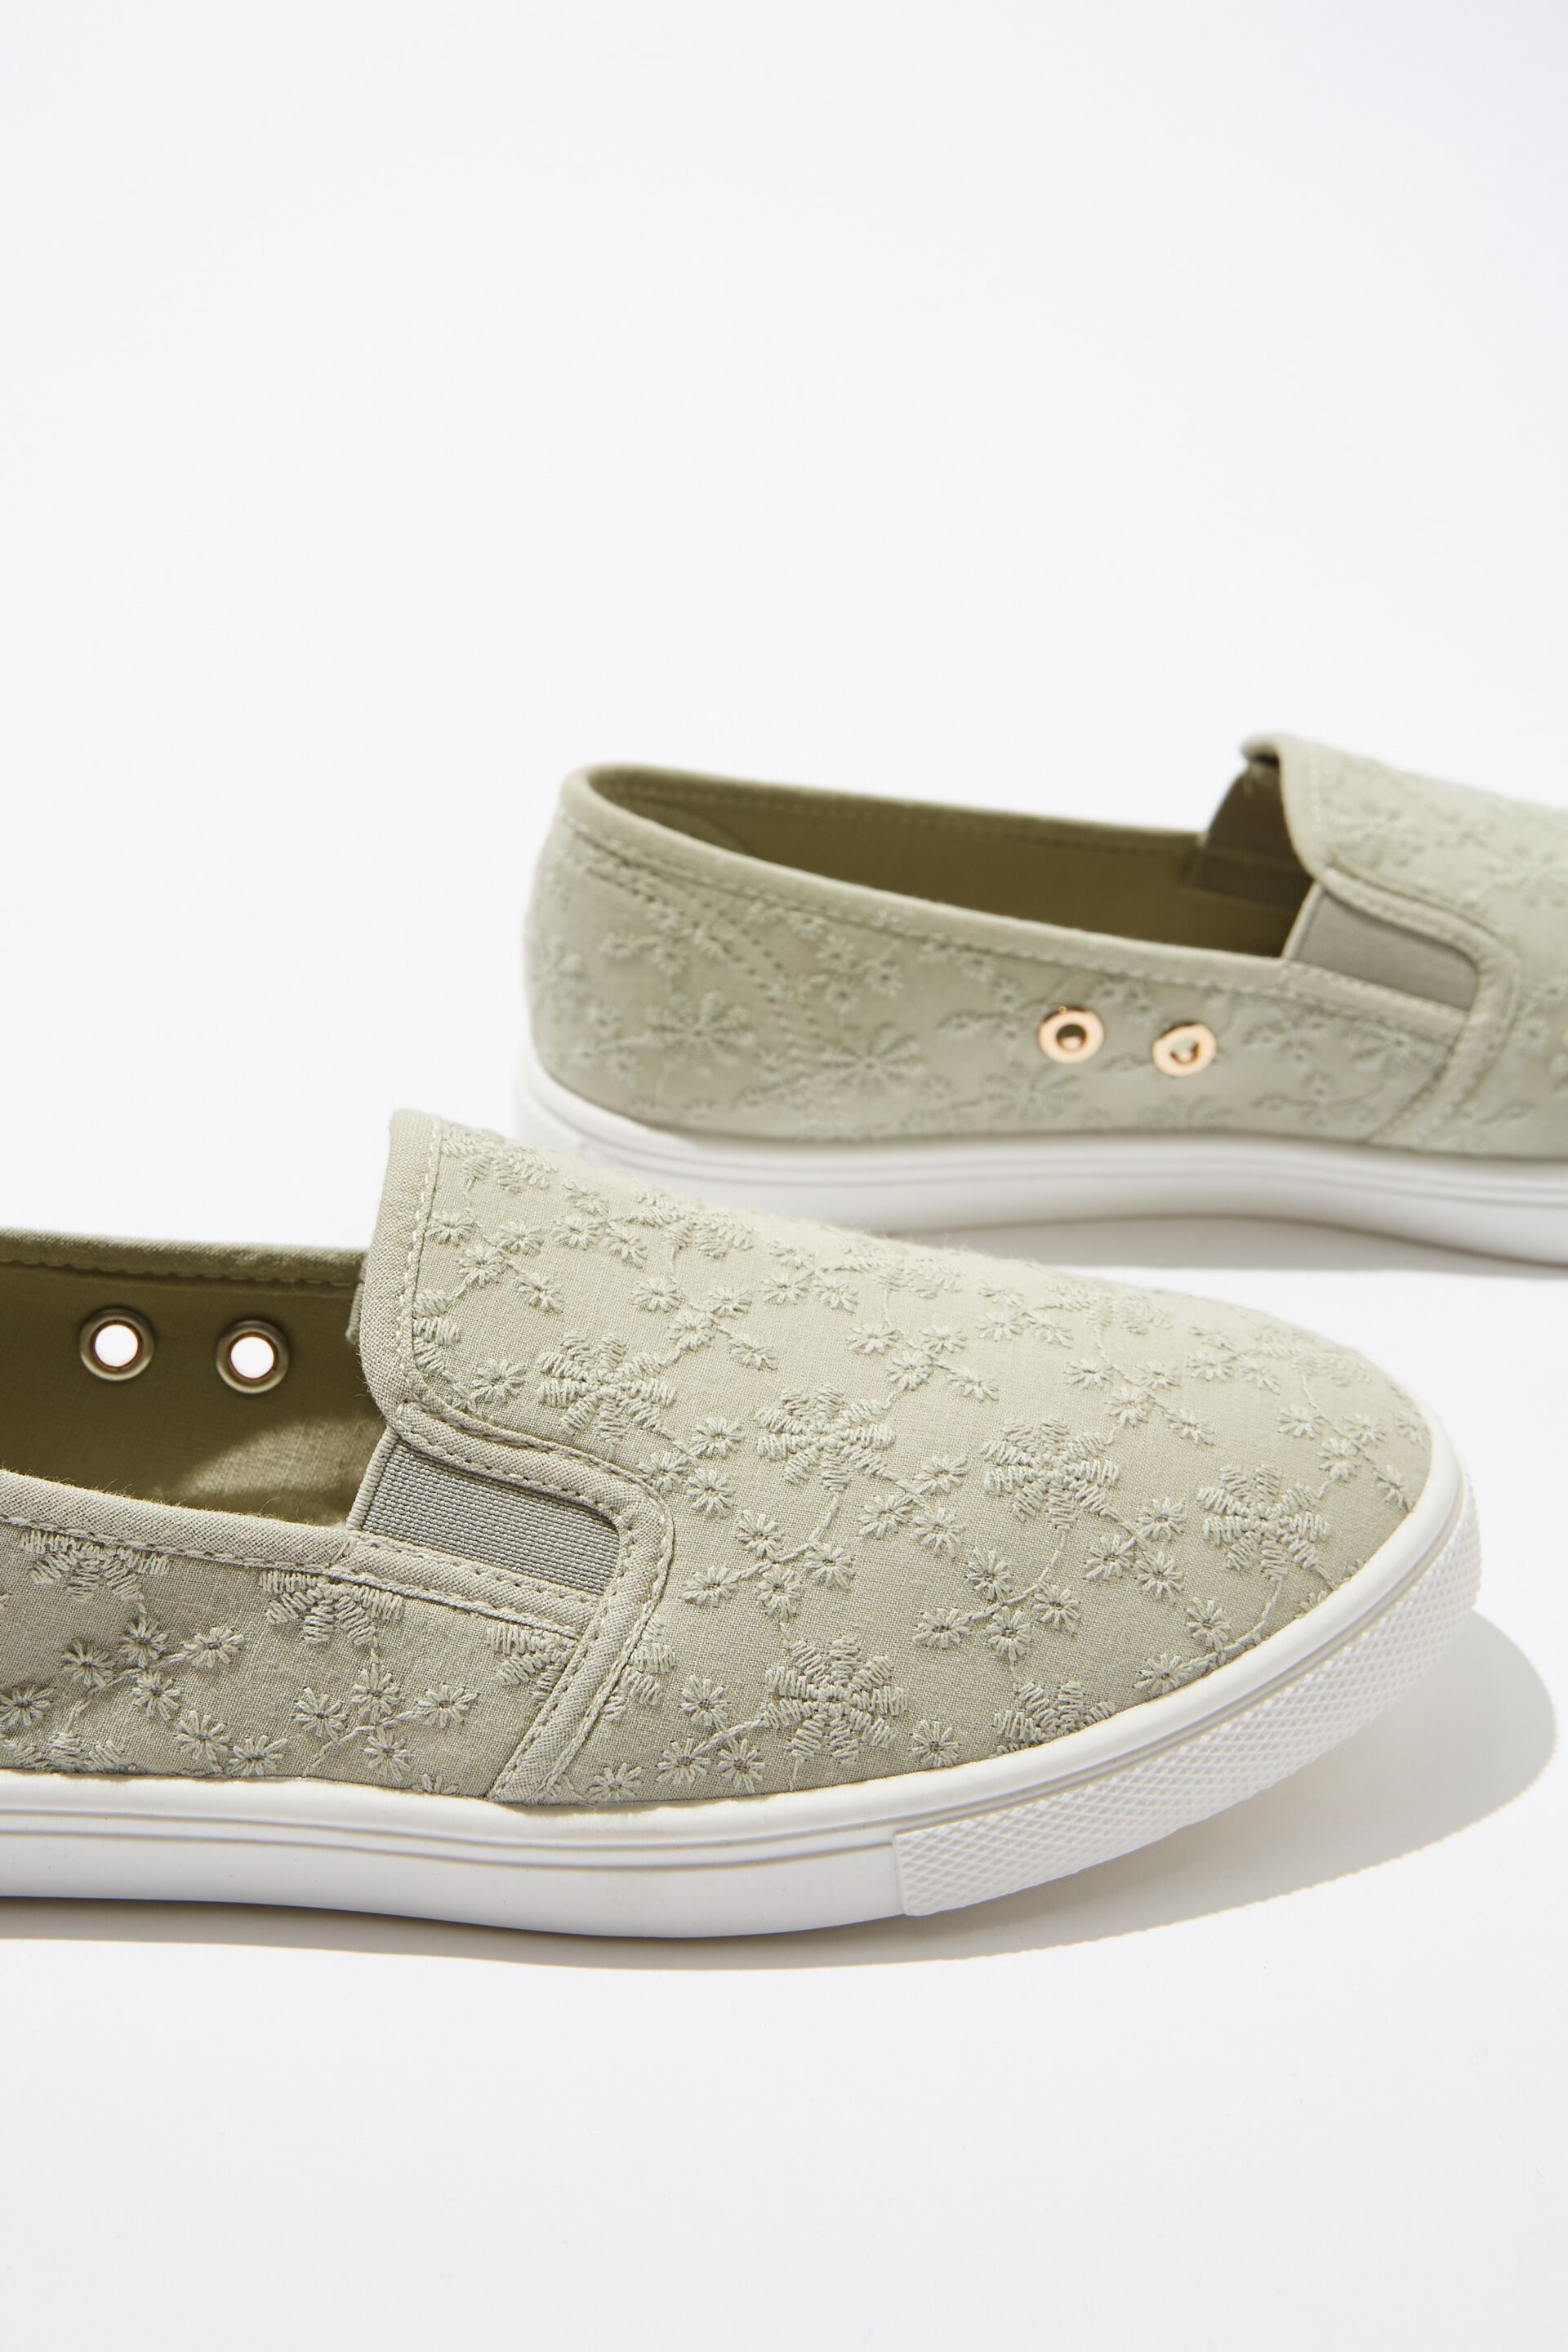 cotton on slip on shoes